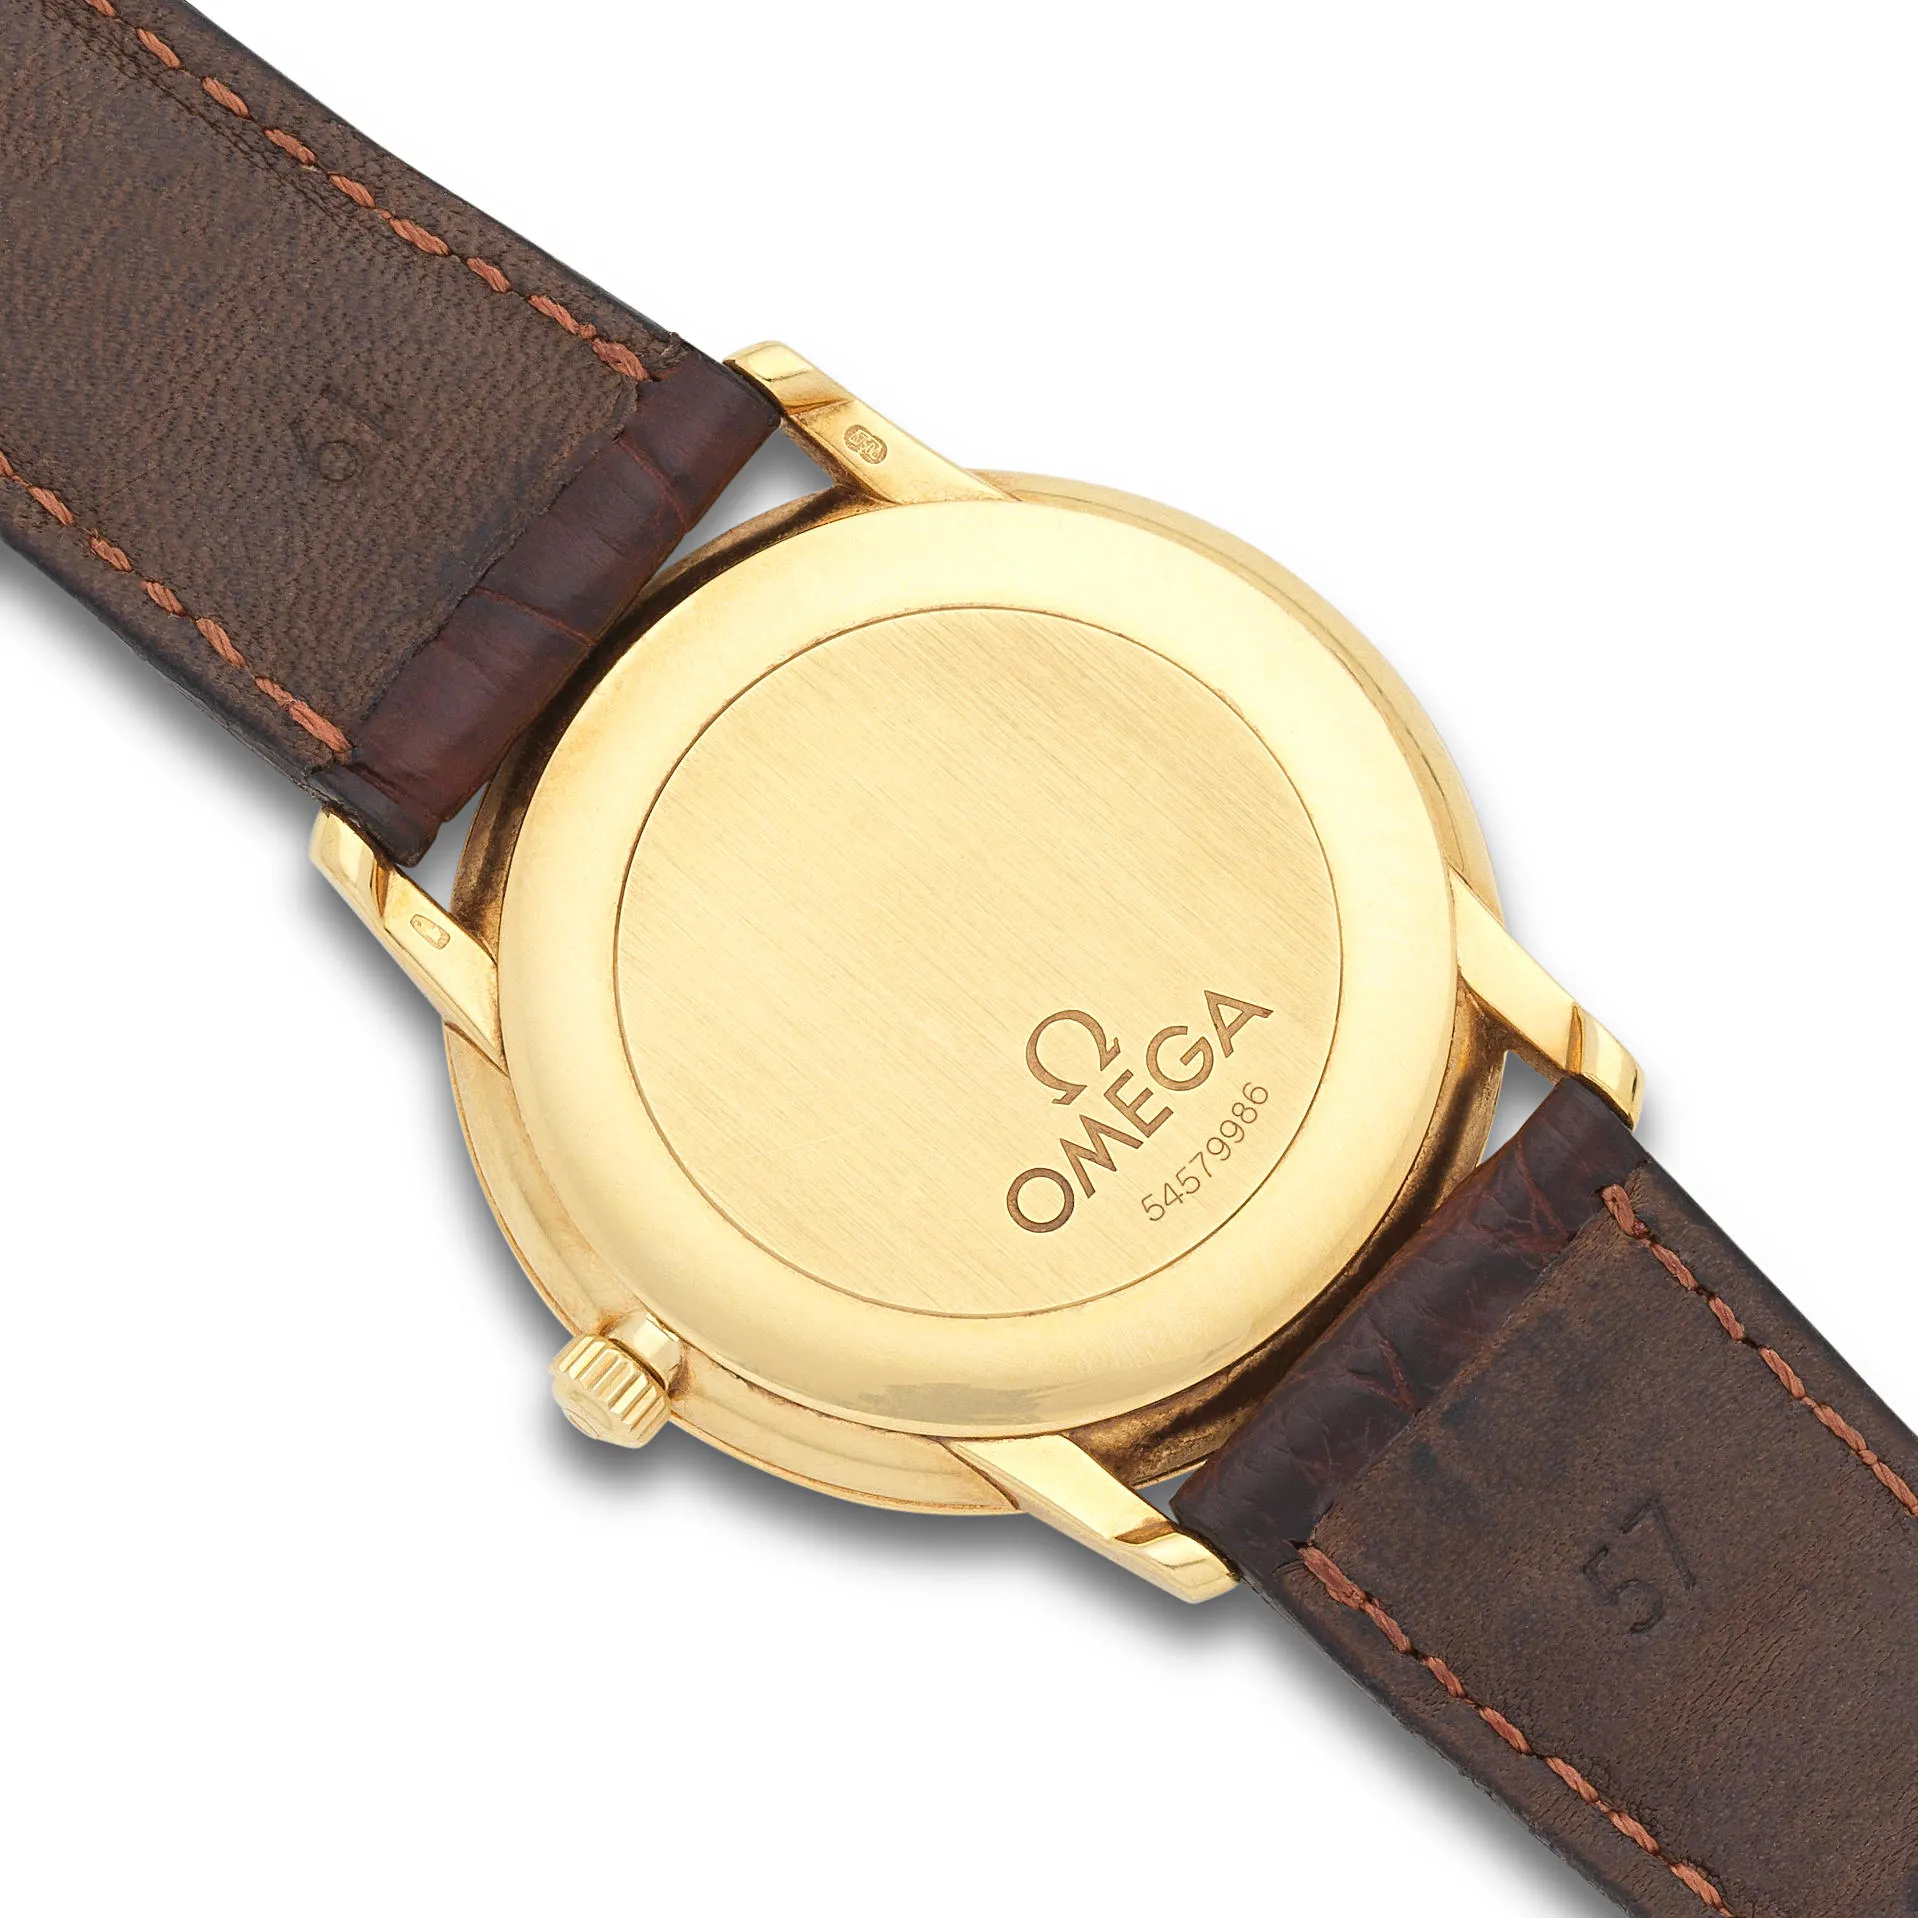 Omega De Ville 4620 34mm Yellow gold Champagne 3